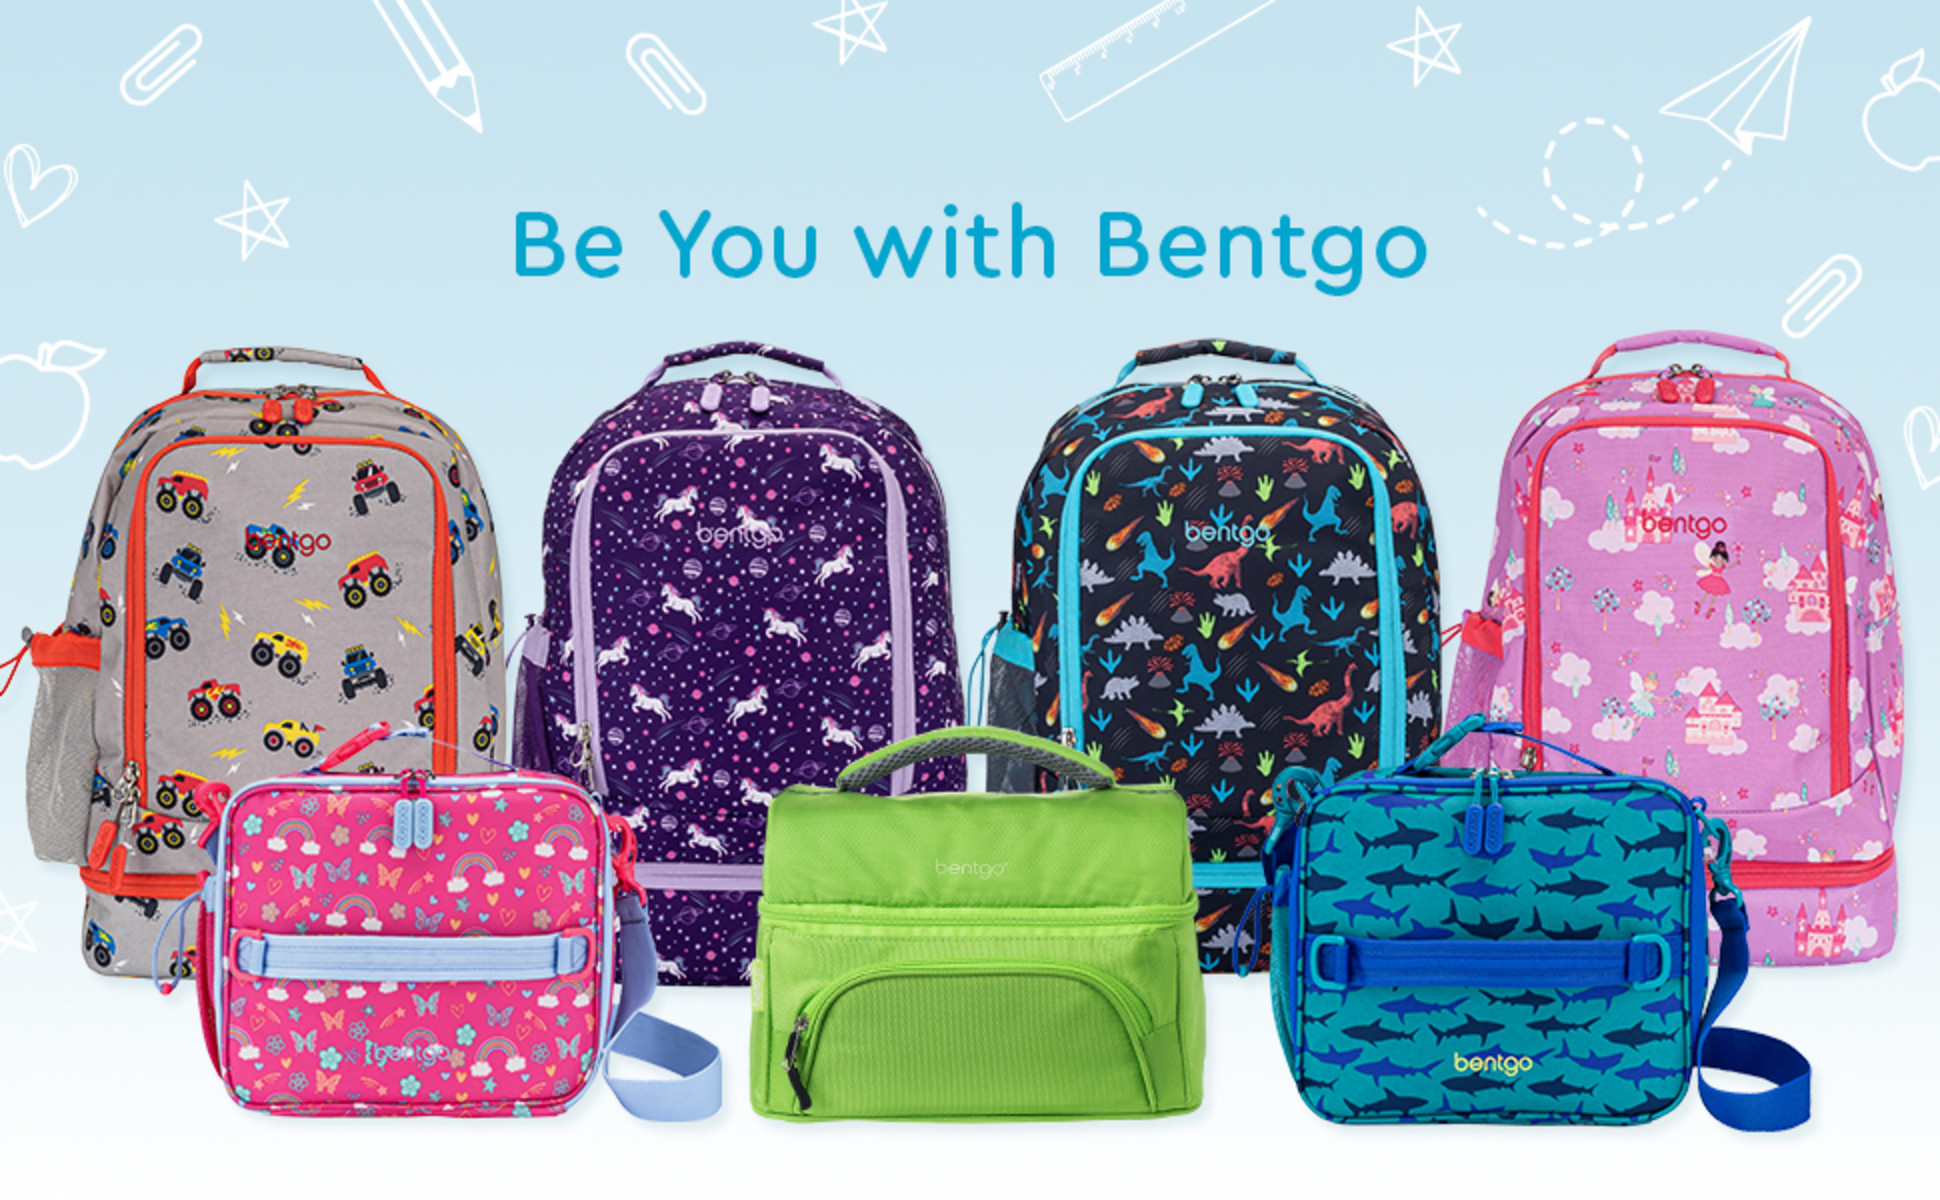  Bentgo® Kids Backpack - Lightweight 14” Backpack in Unique  Prints for School, Travel, & Daycare - Roomy Interior, Durable &  Water-Resistant Fabric, & Loop for Lunch Bag (Shark)